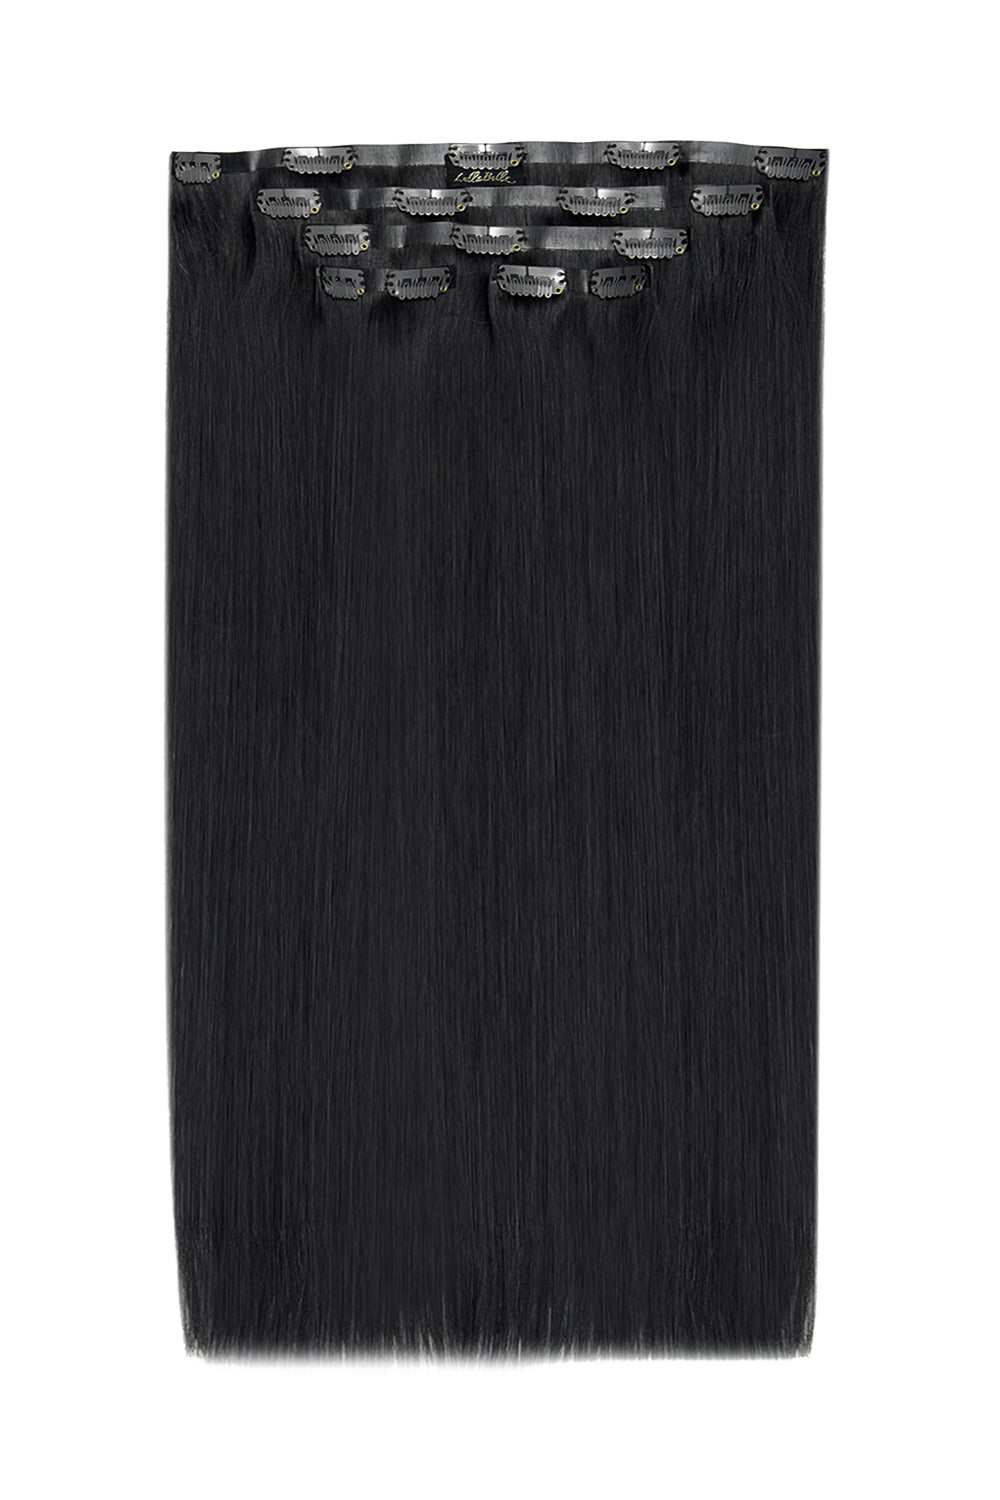 Luxury Gold 18" 5 Piece Human Hair Extensions  - Jet Black